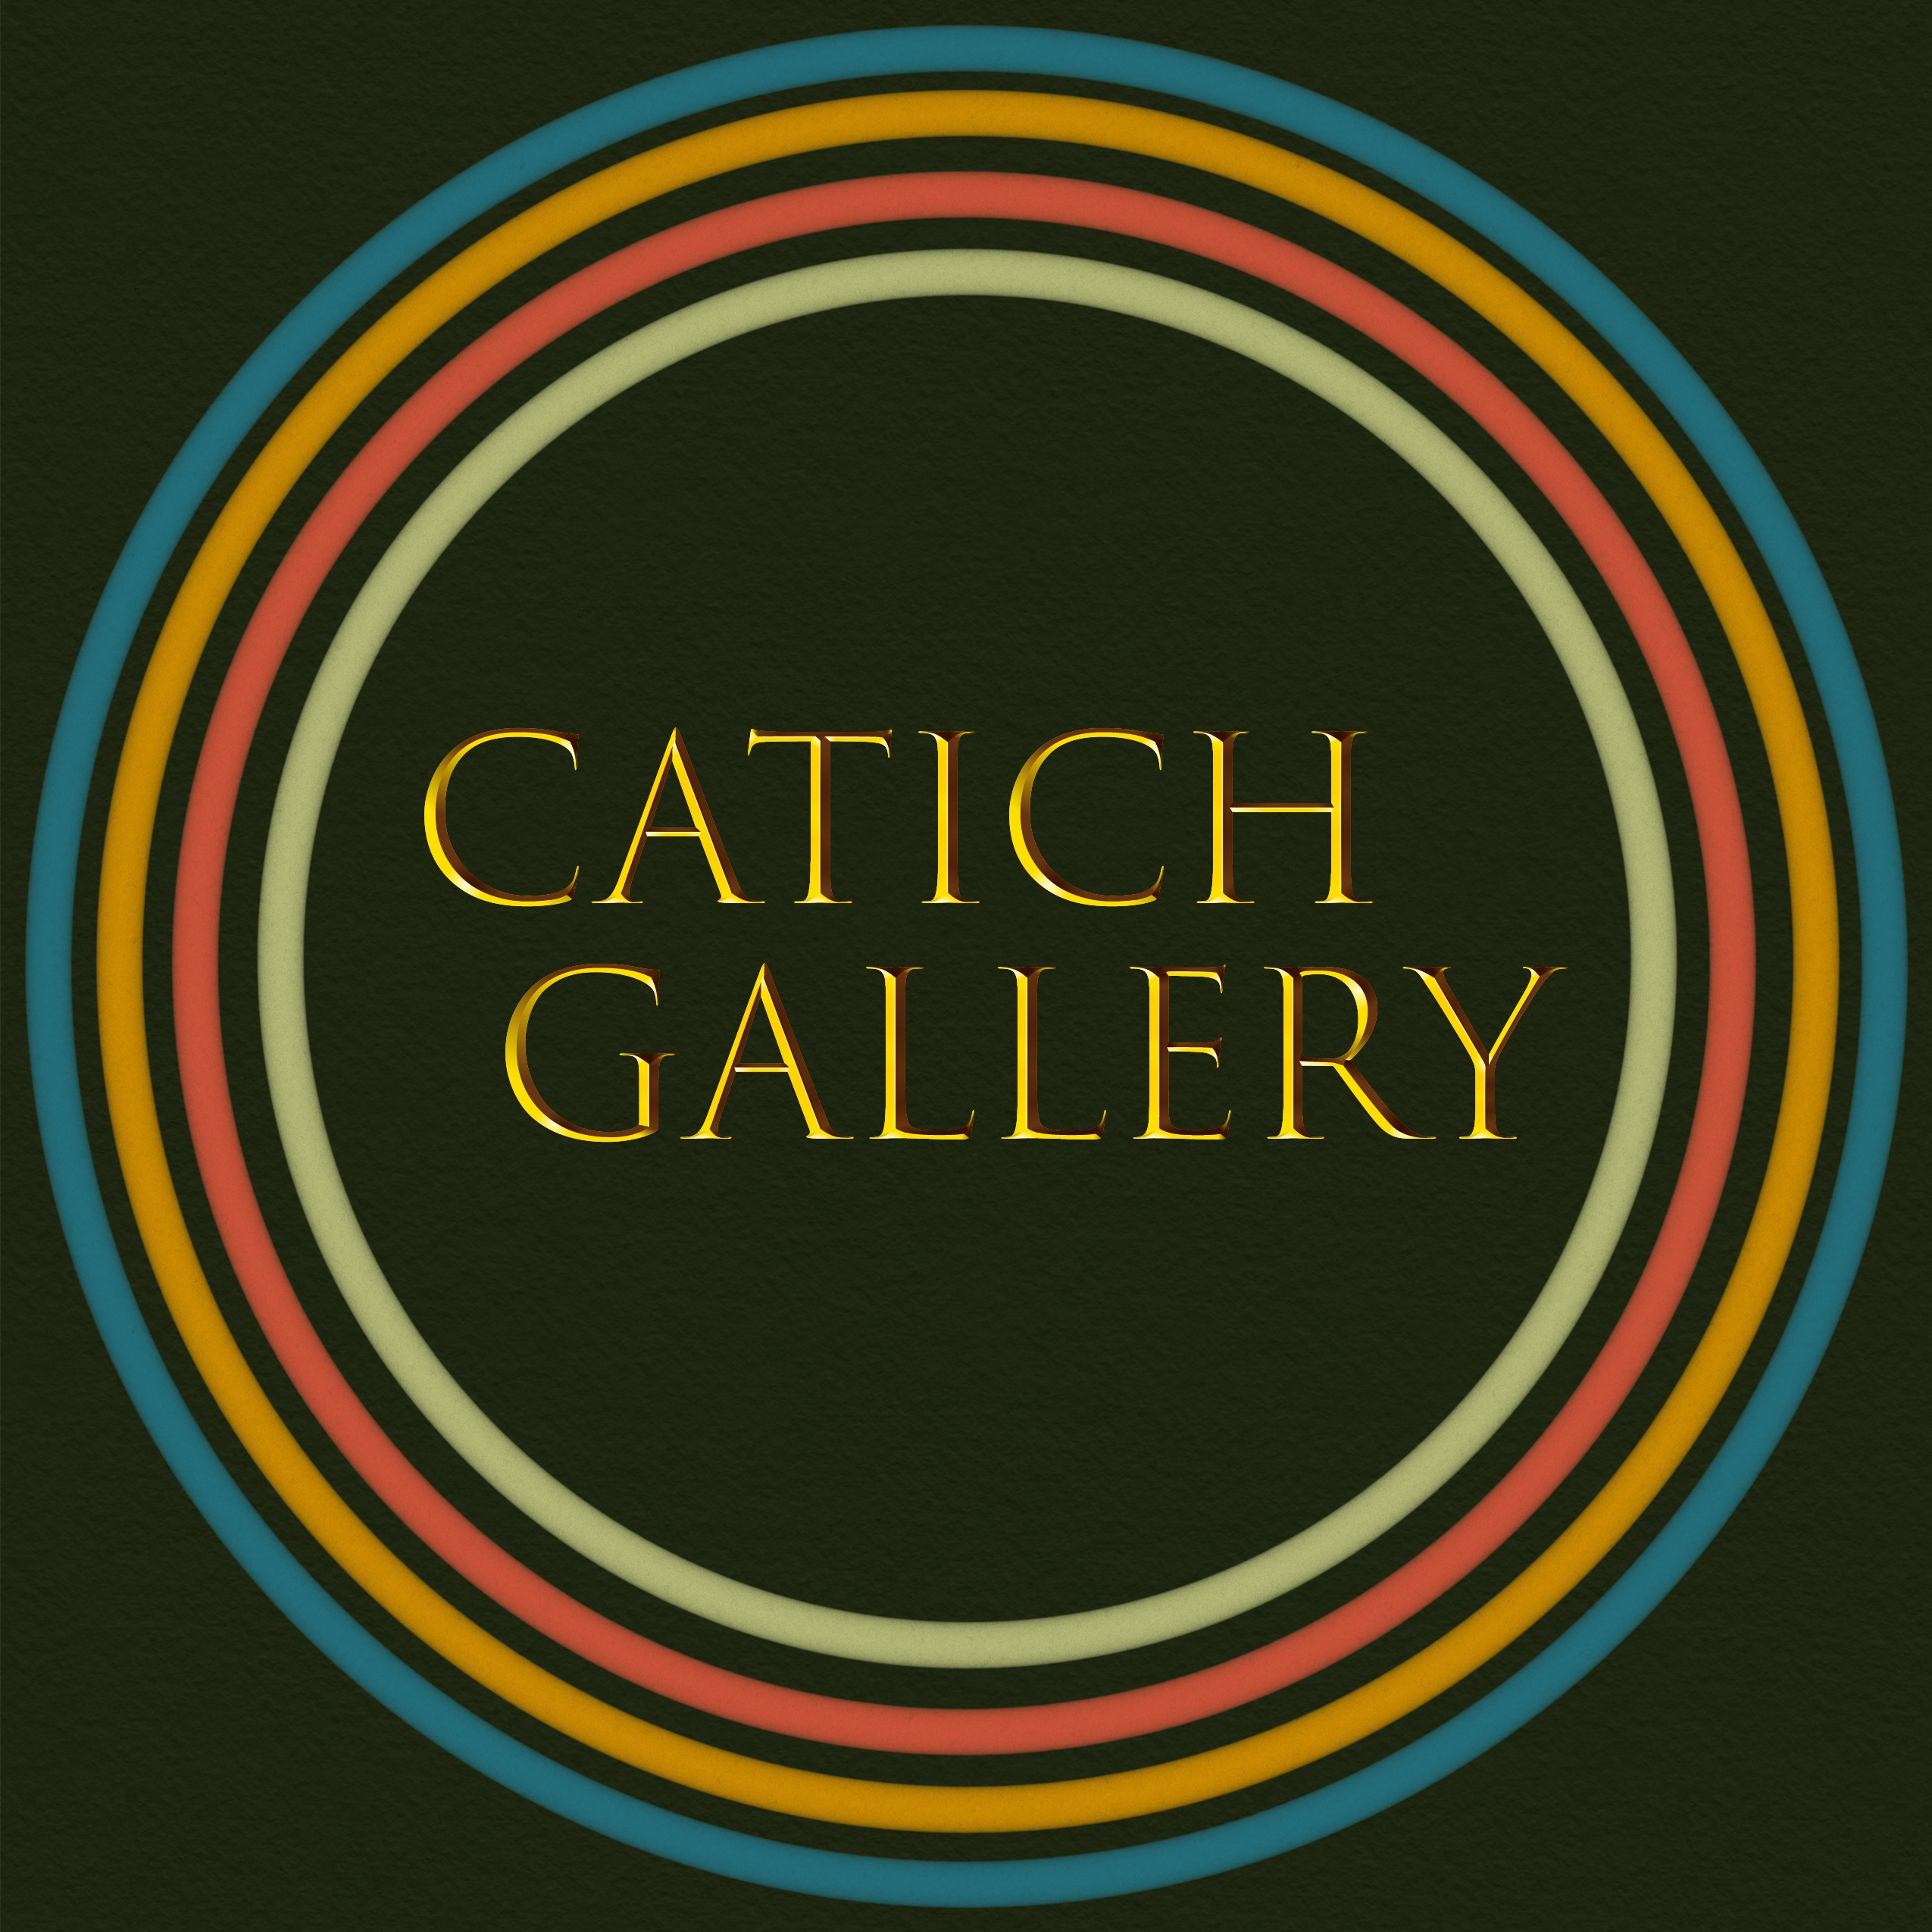 Q&A Catich Gallery Podcasts